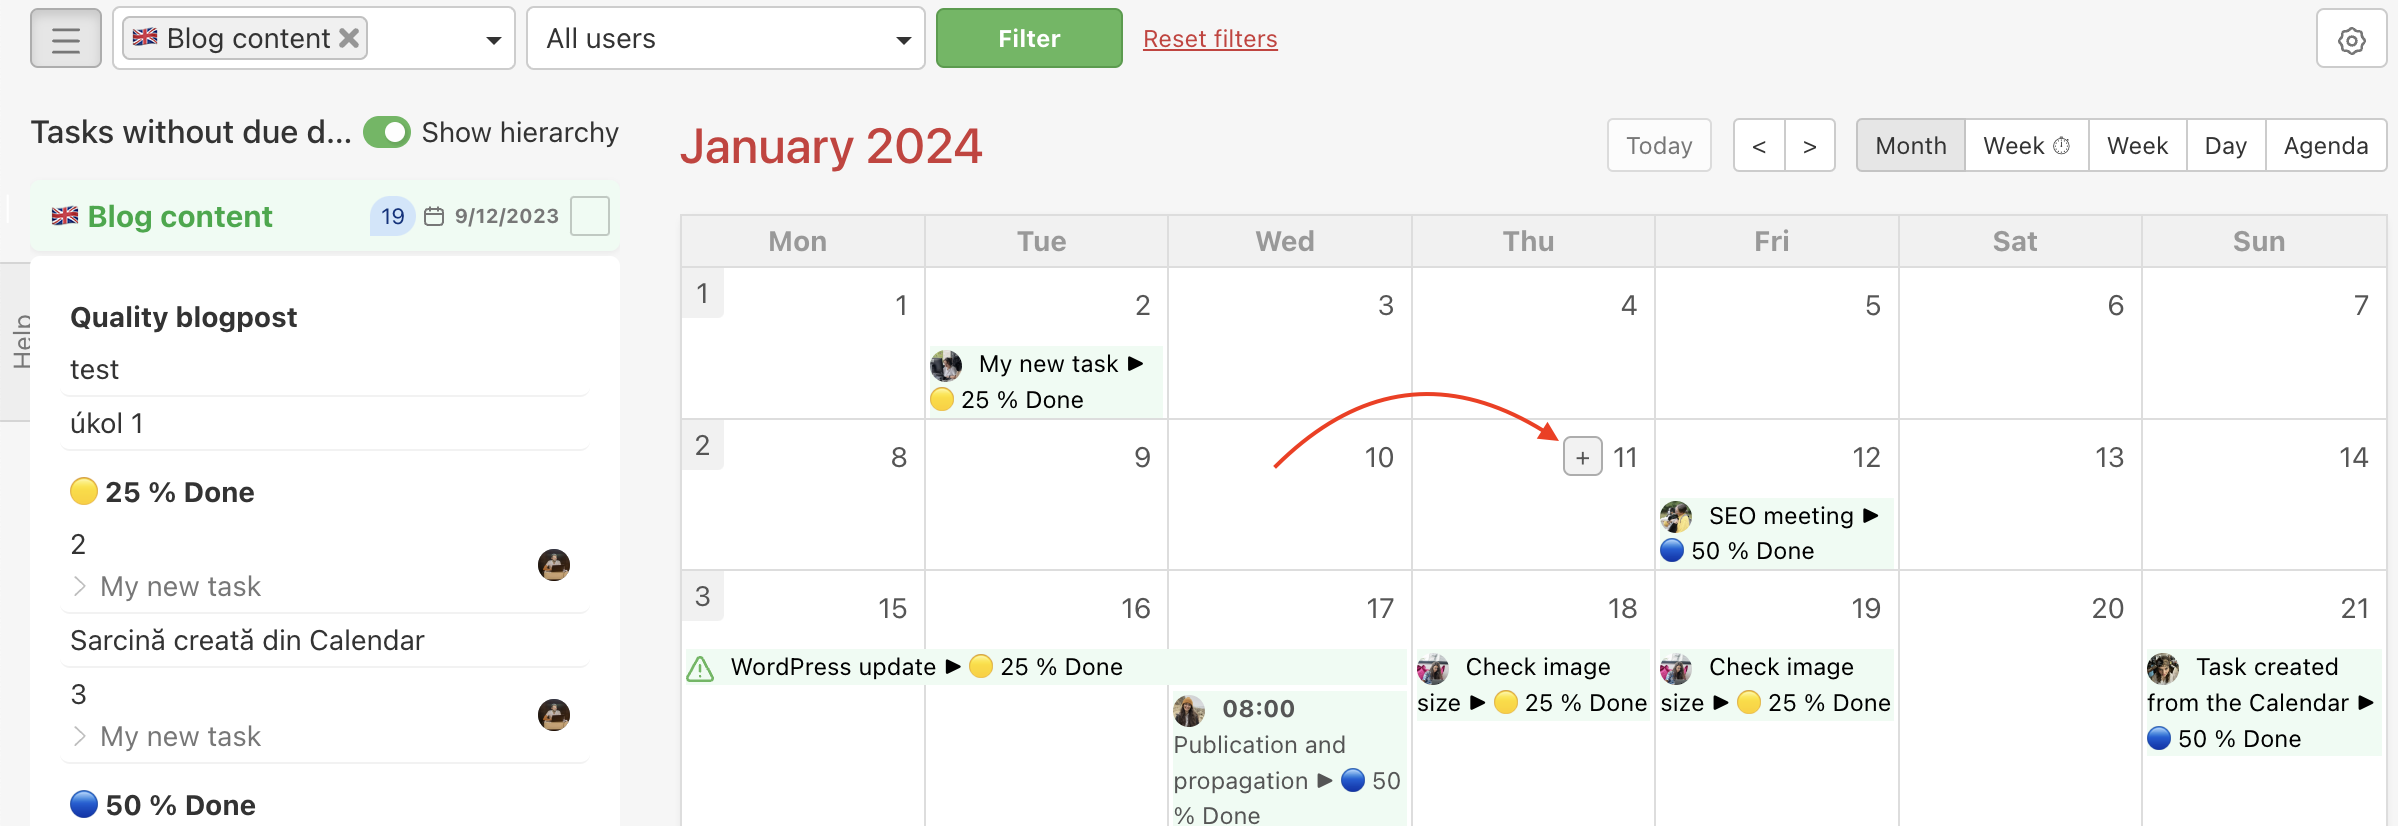 How to add a new task in the Calendar via the + button in the monthly view.